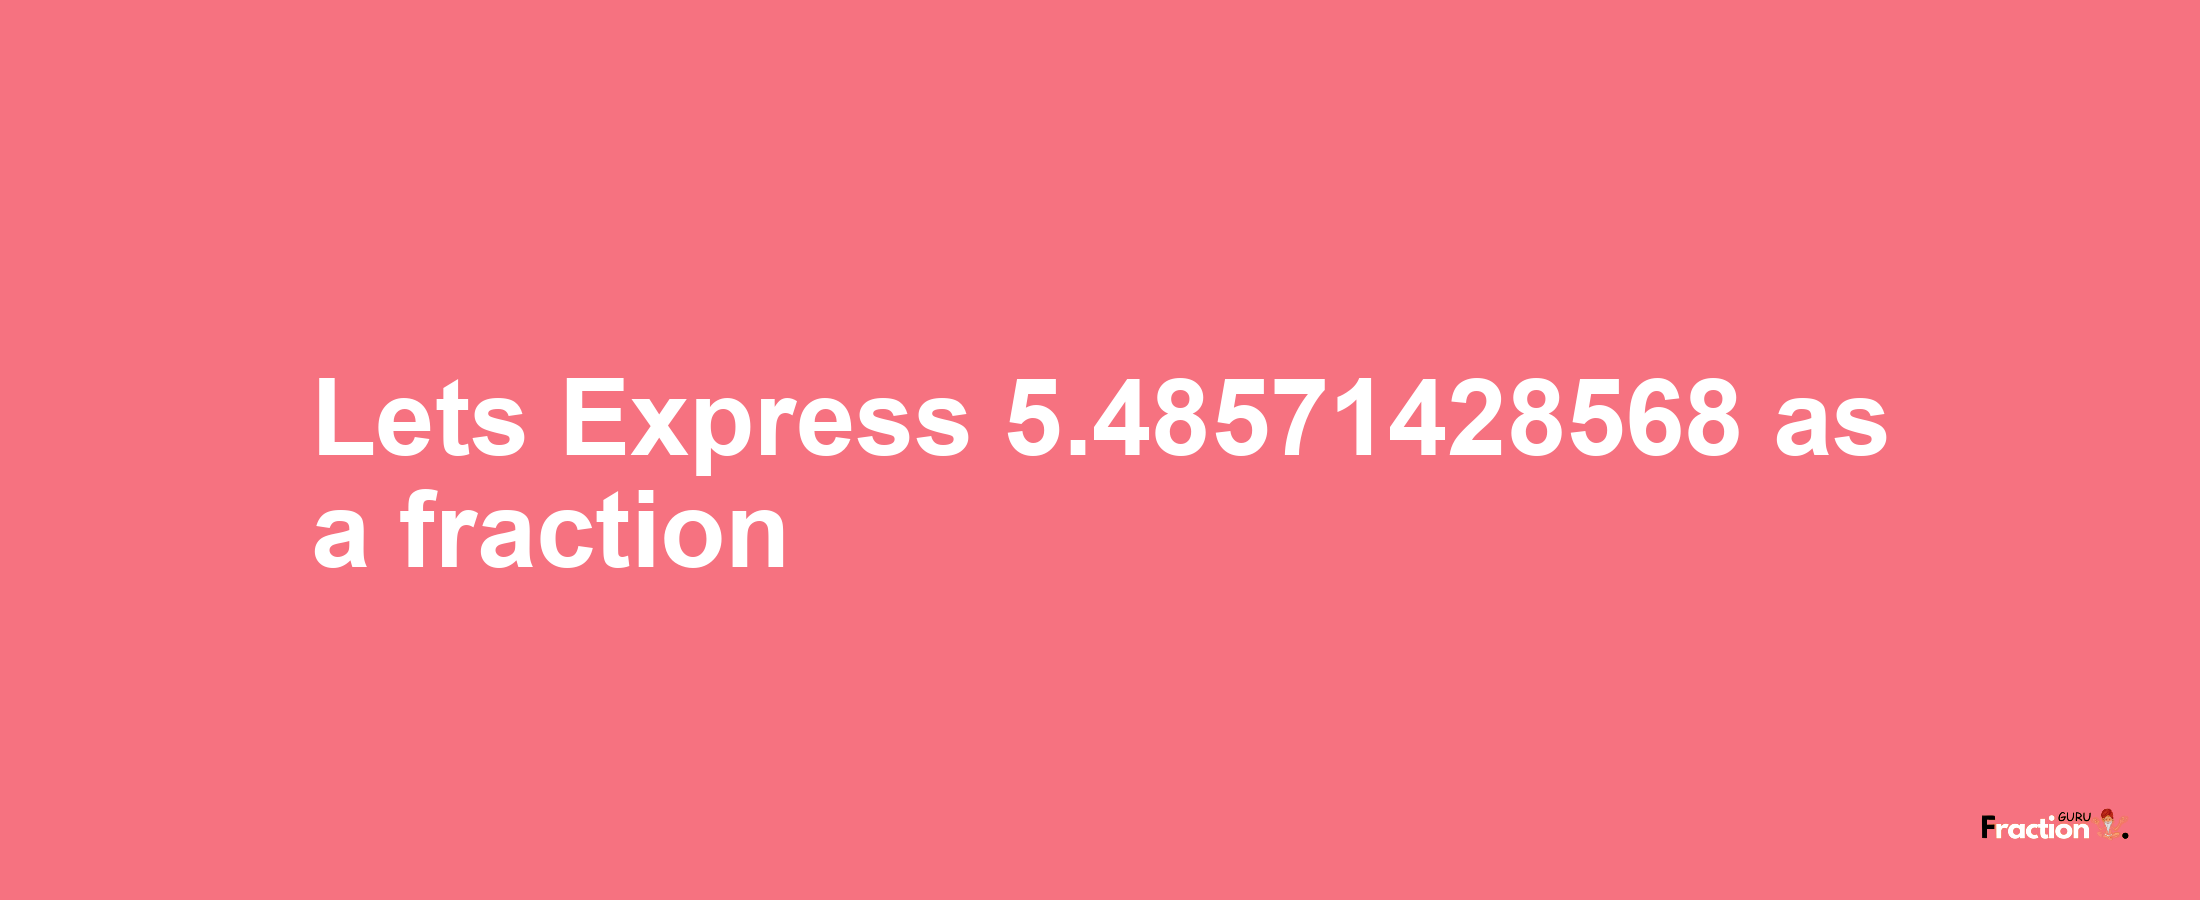 Lets Express 5.48571428568 as afraction